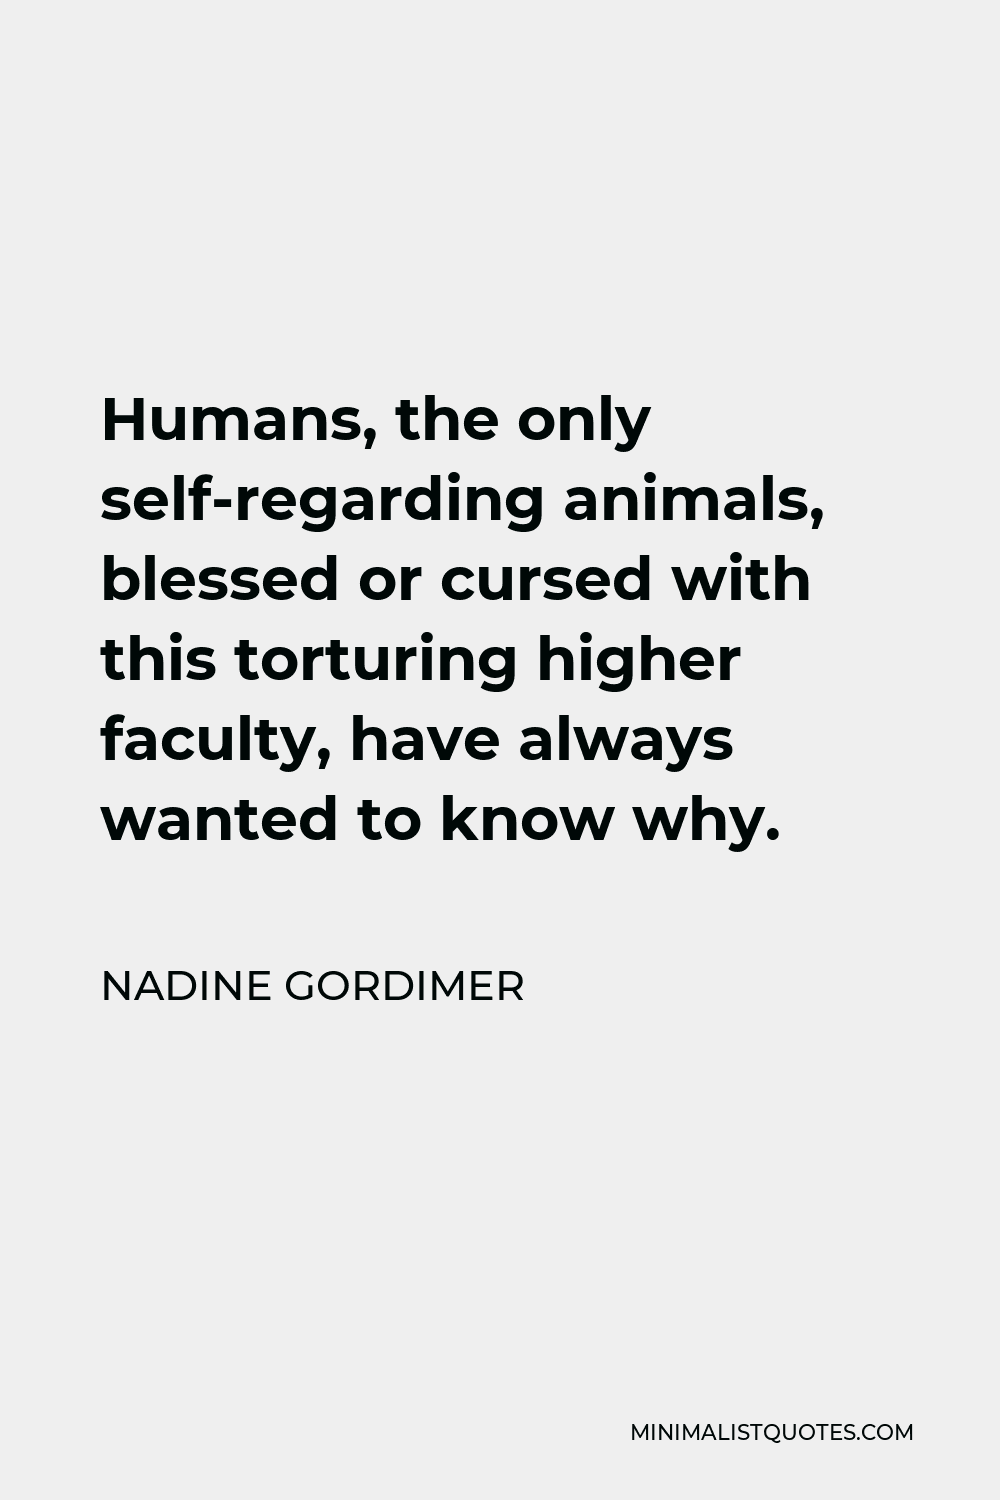 Nadine Gordimer Quote - Humans, the only self-regarding animals, blessed or cursed with this torturing higher faculty, have always wanted to know why.